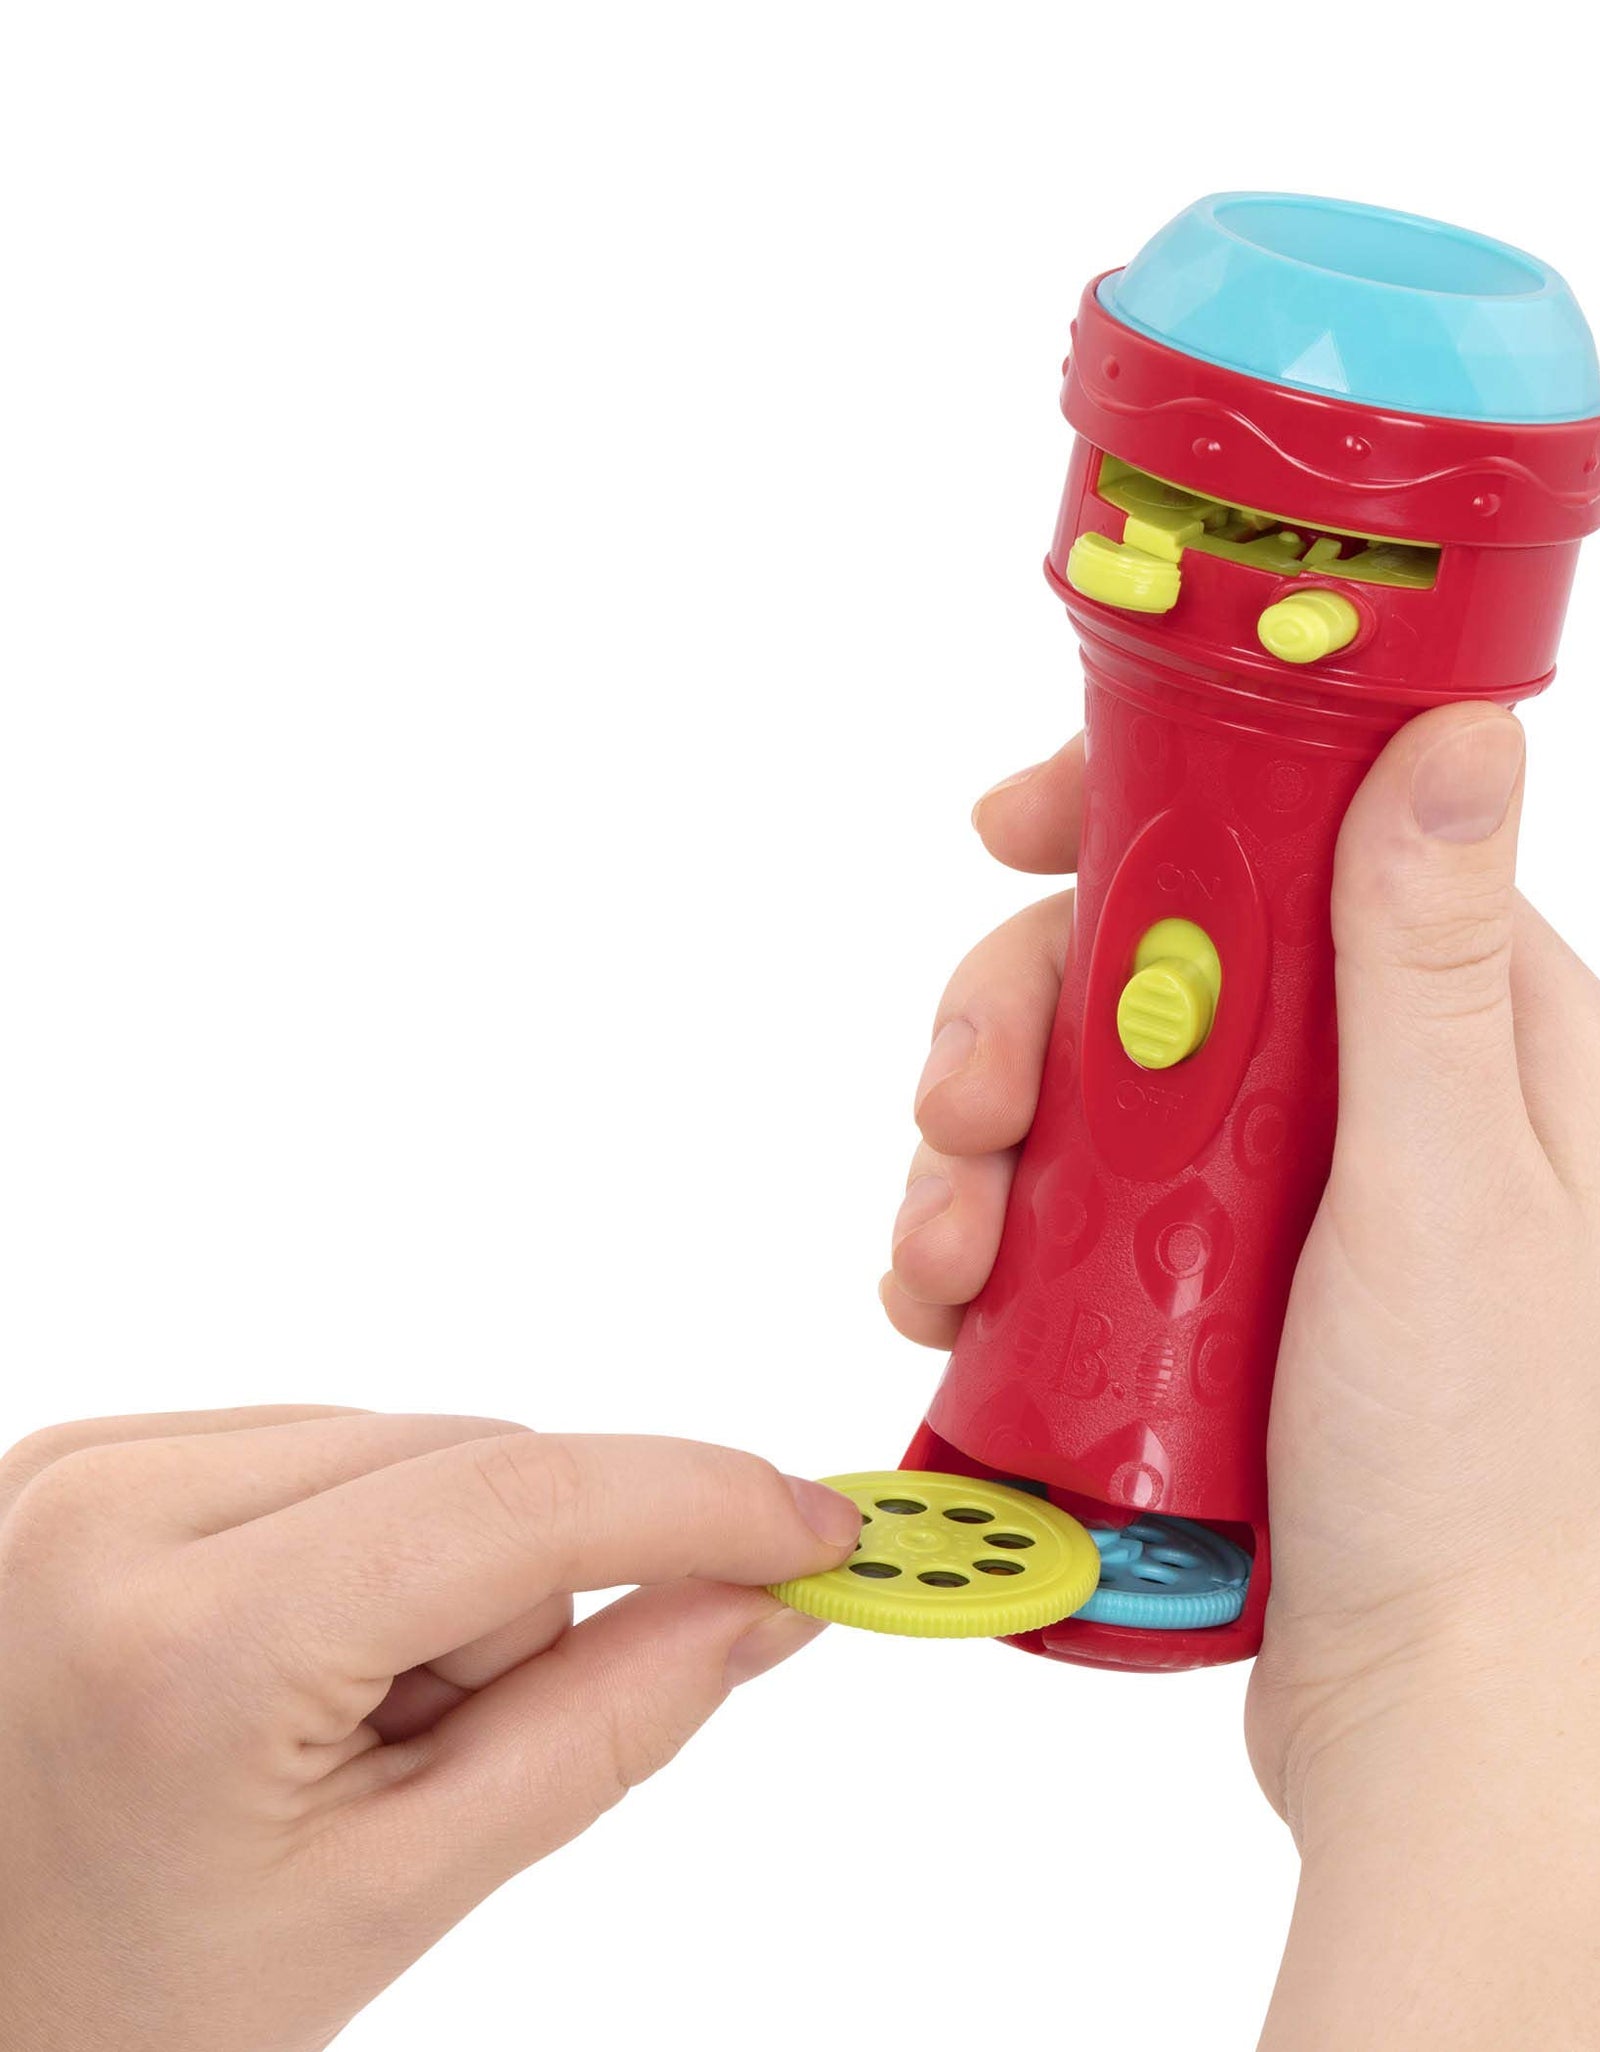 B. toys – Light Me To The Moon – Children’S Projector Flashlight with Image Reels That Make Everything Cosmic & Bright, Red